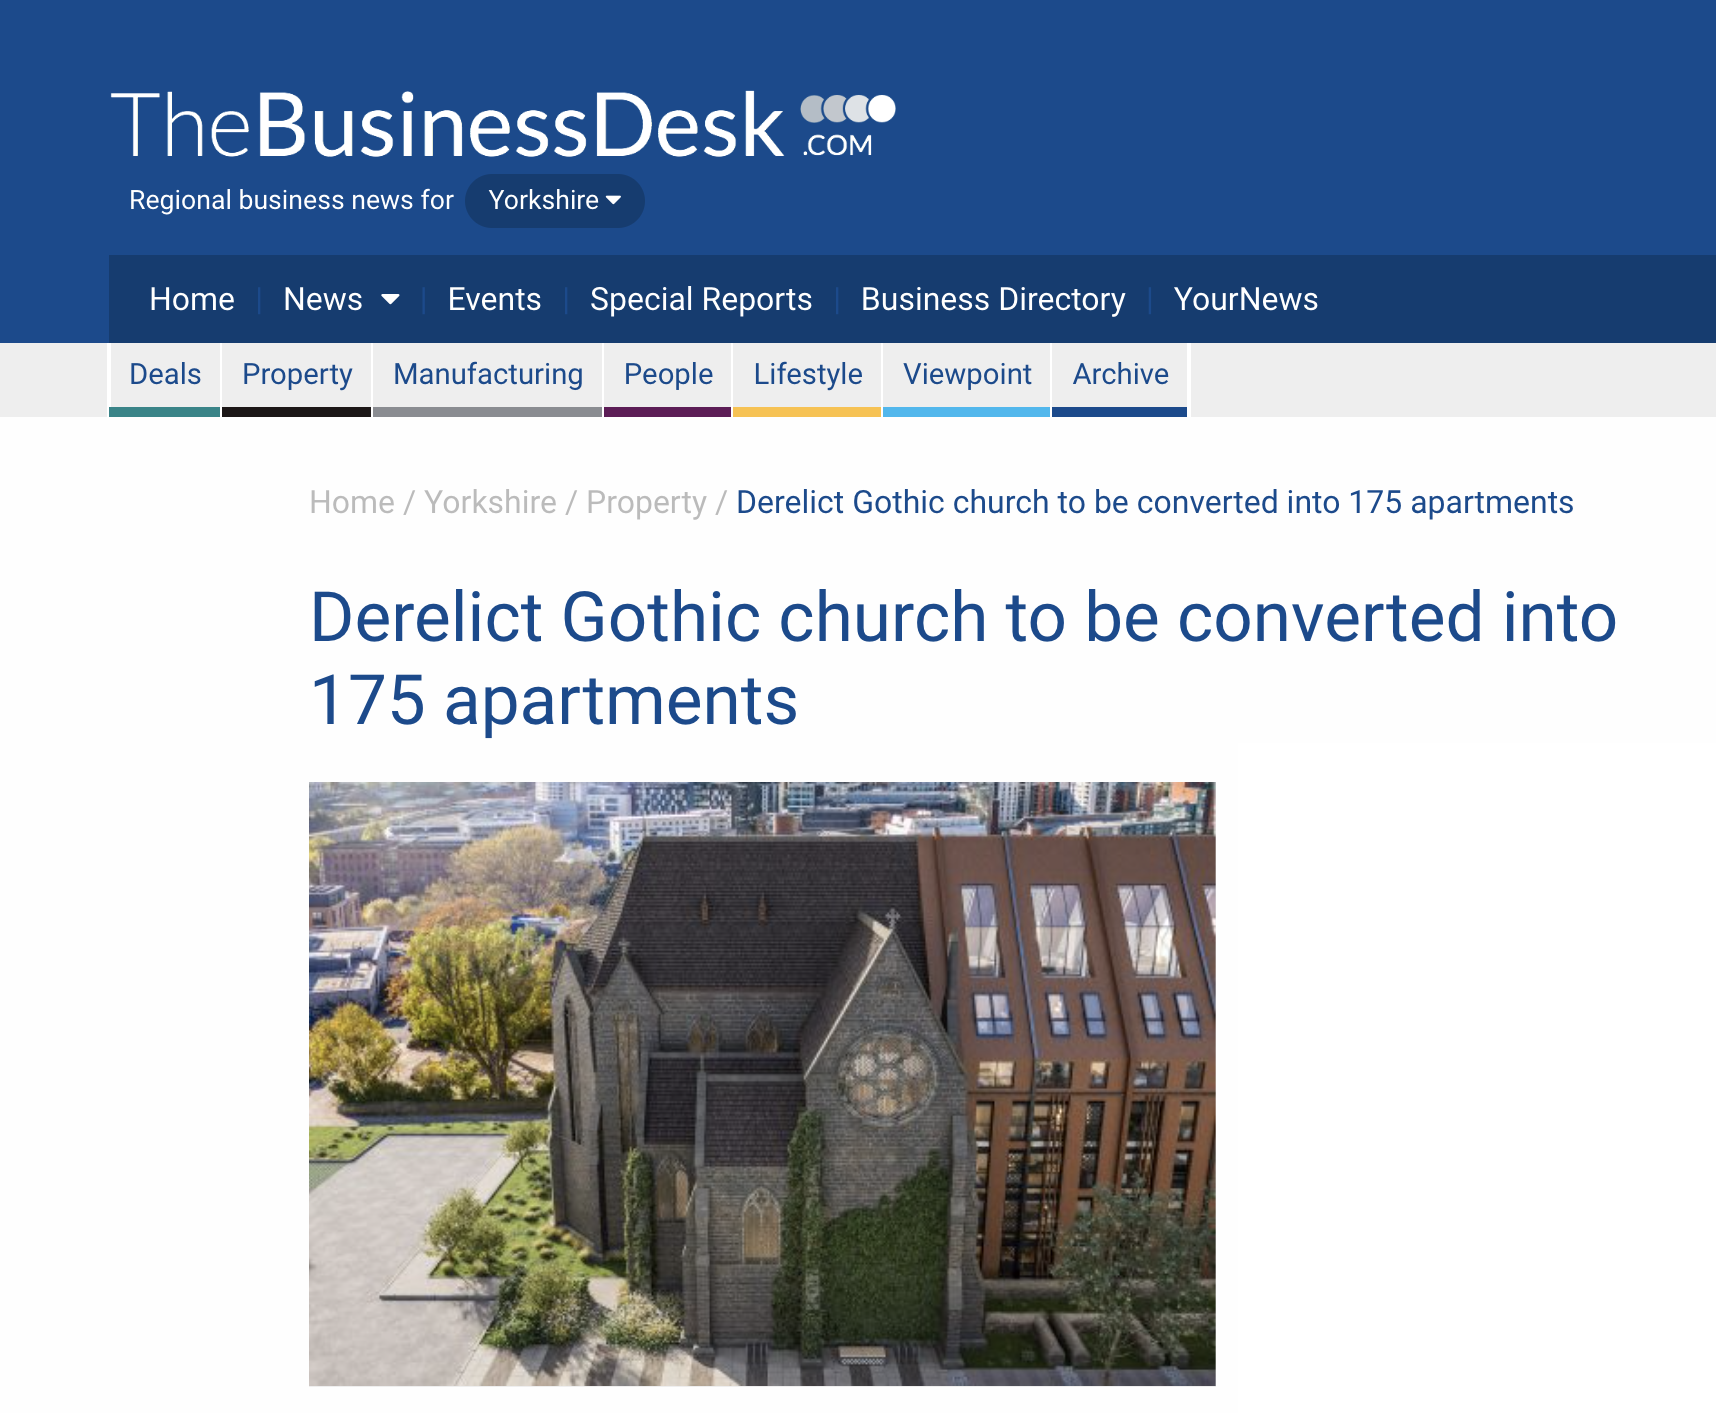 Derelict Gothic church to be converted into 175 apartments